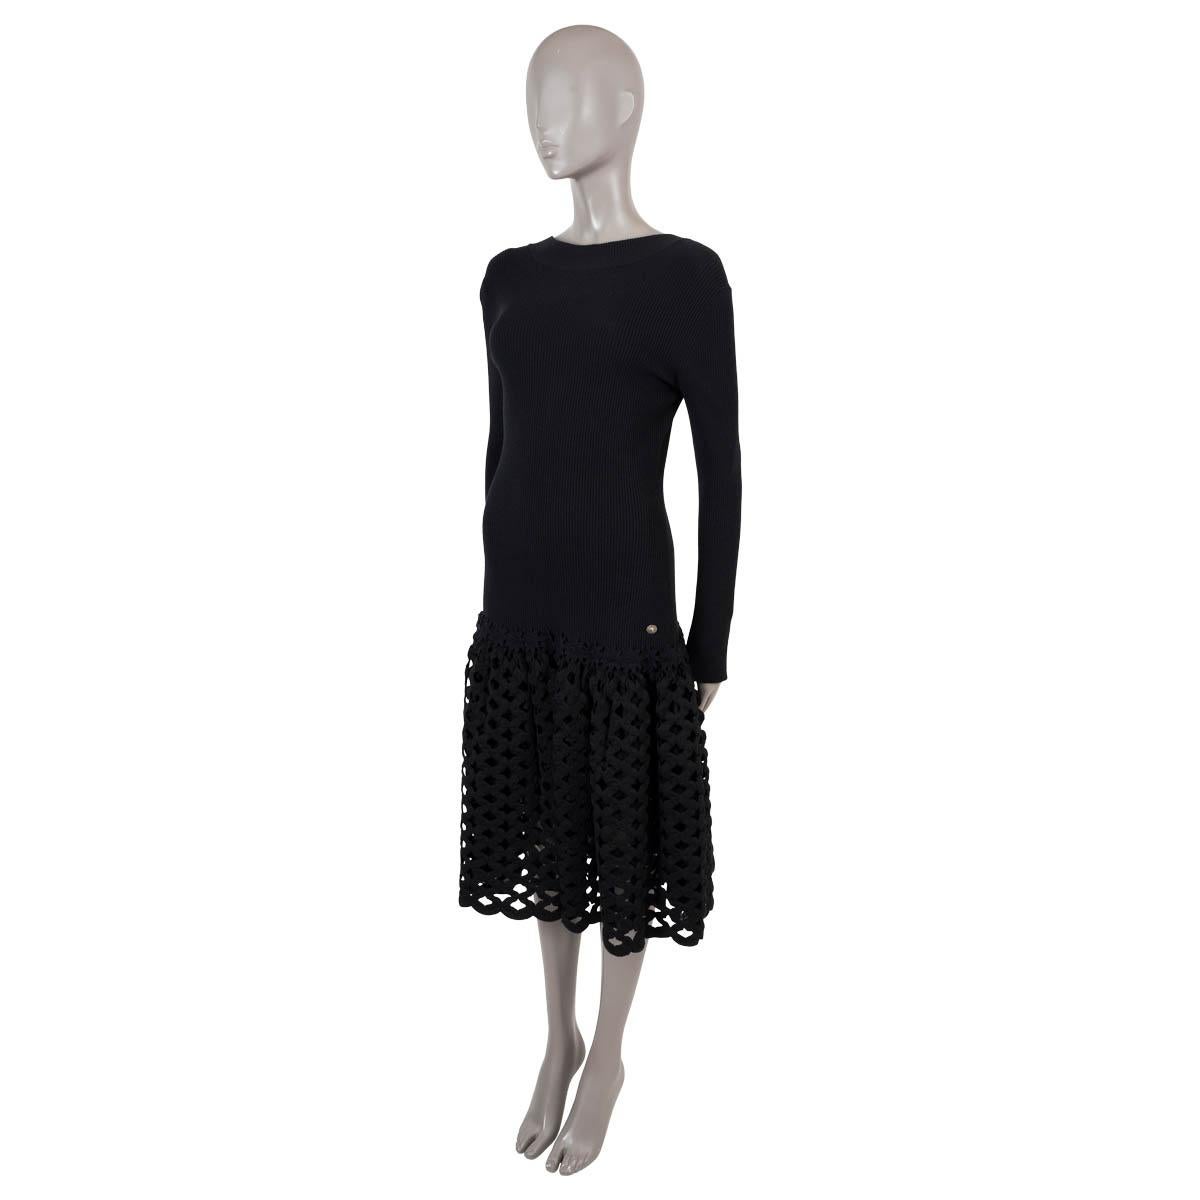 100% authentic Chanel panelled knit dress in black wool (46%), nylon (29%), mohair (16%) and polyester (9%). Features long sleeves, a rib-knit top and lattice skirt, drop waist with floral trim, V cut back and lion head button on the hips. Unlined.